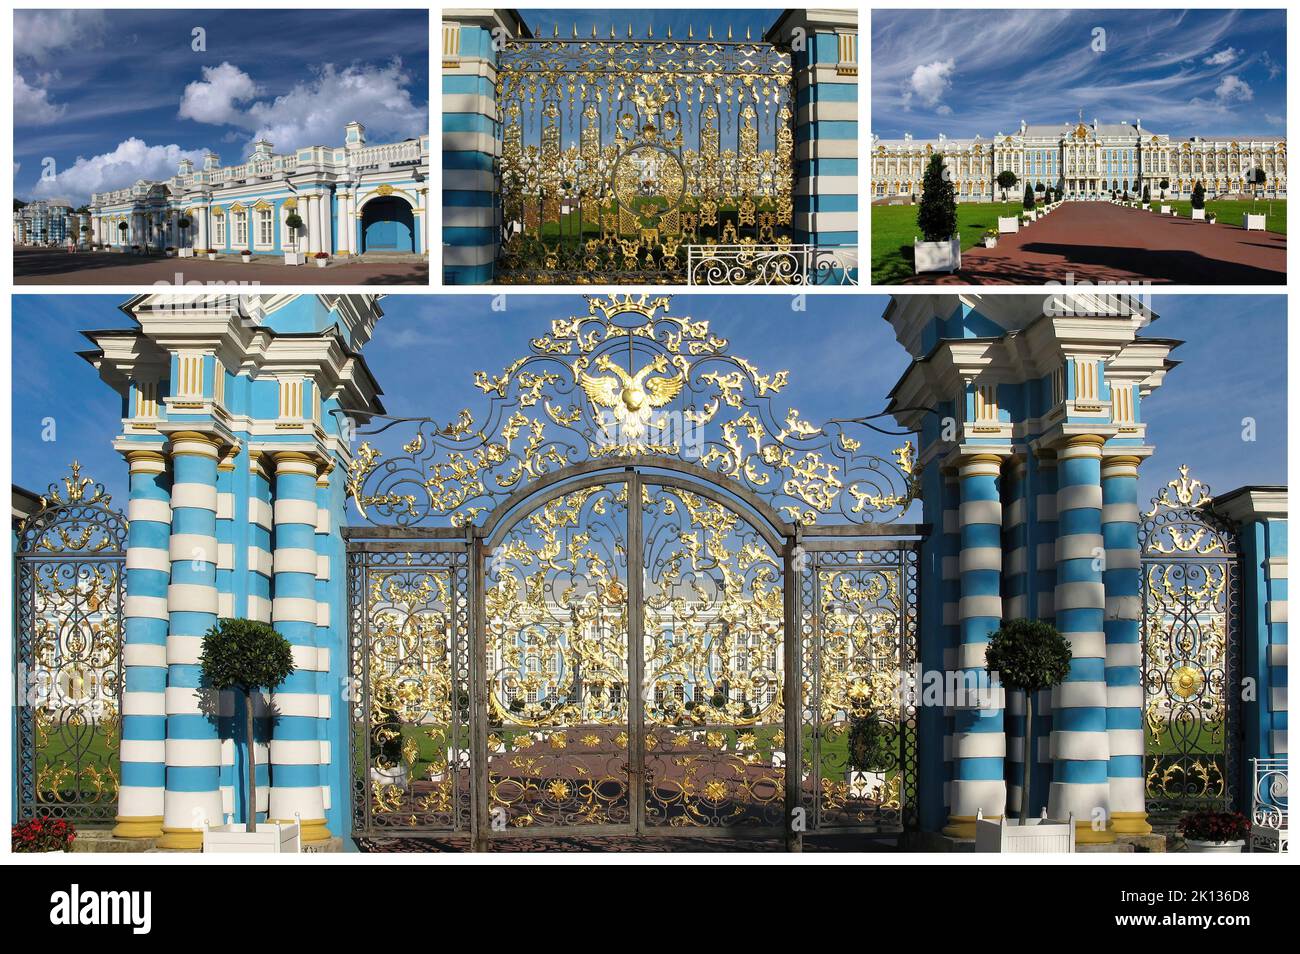 The Beautiful and Luxurious Catherine Palace, located in the city of Tsarskoye Selo (Pushkin), St. Petersburg, Russia Stock Photo